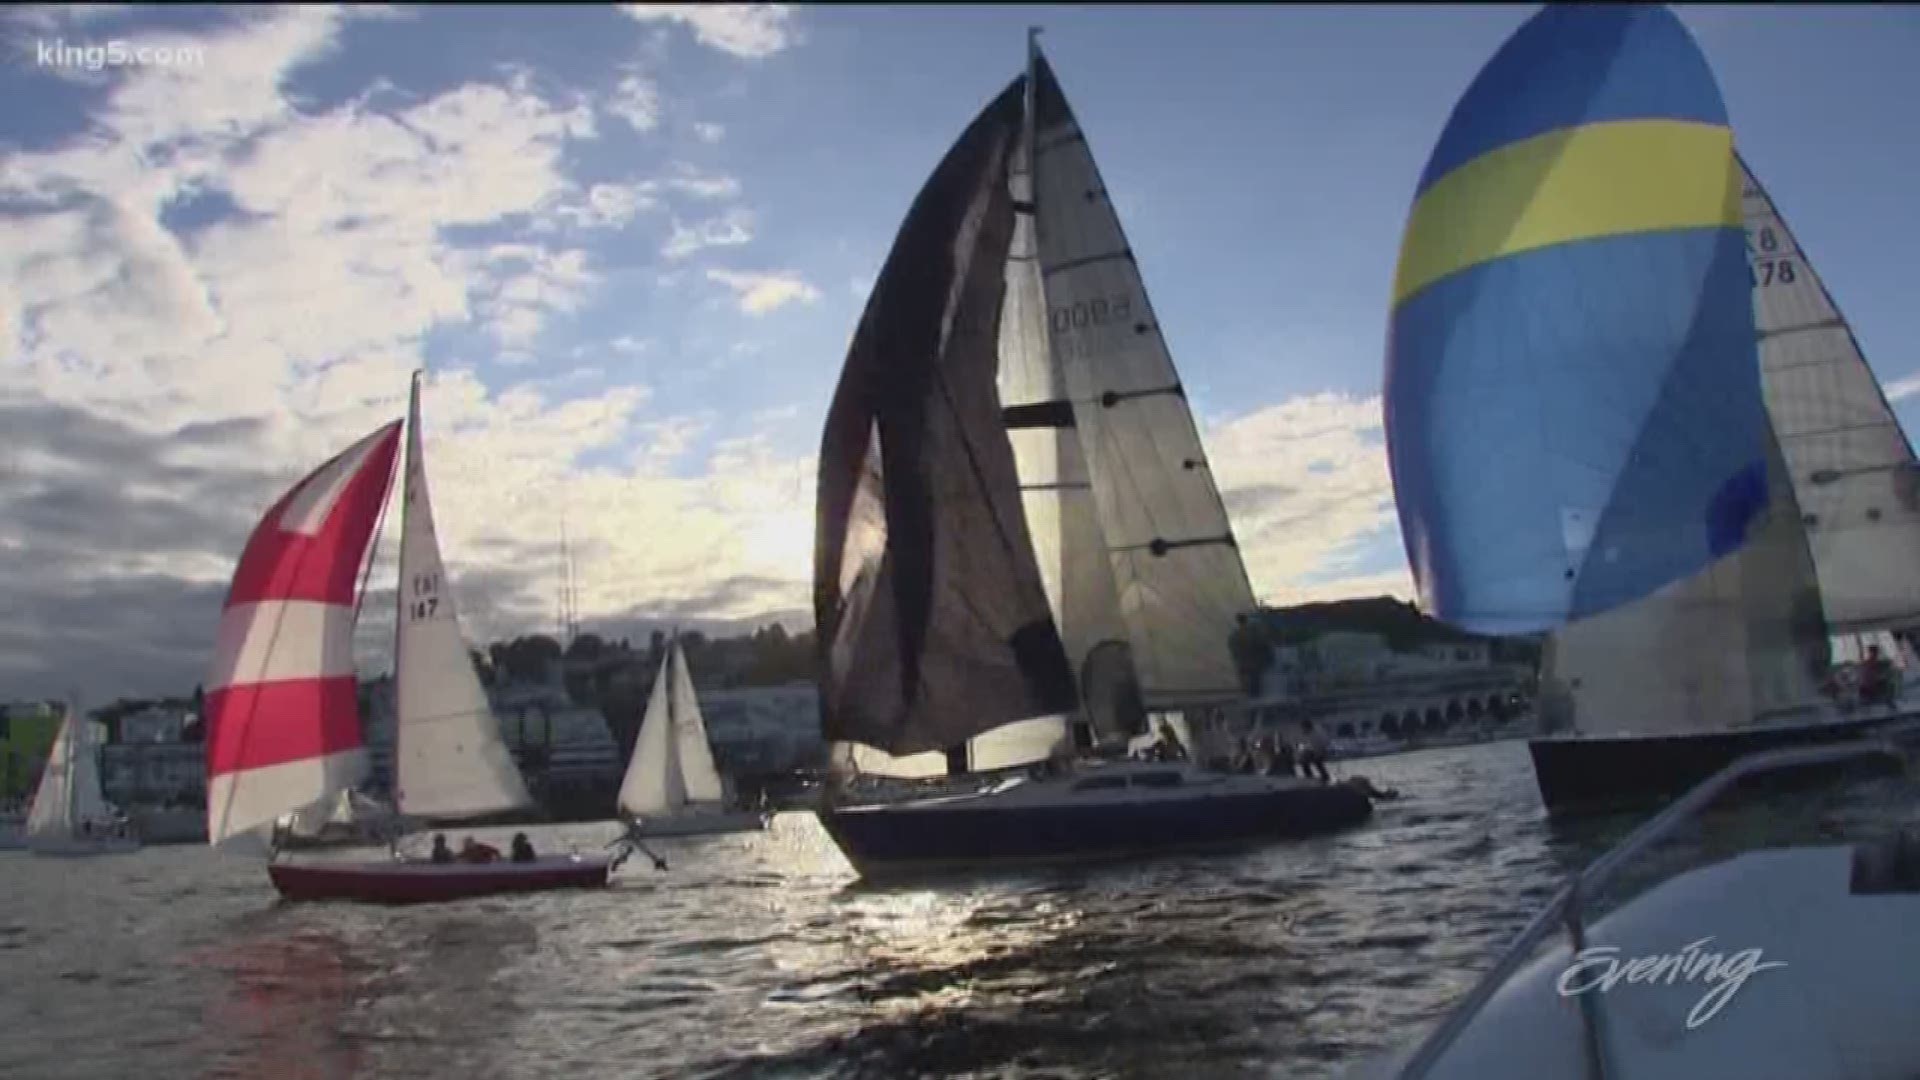 On Tuesday nights in the summer...Seattle's Lake Union becomes the setting for one of the silliest sailboat races around - Duck Dodge.